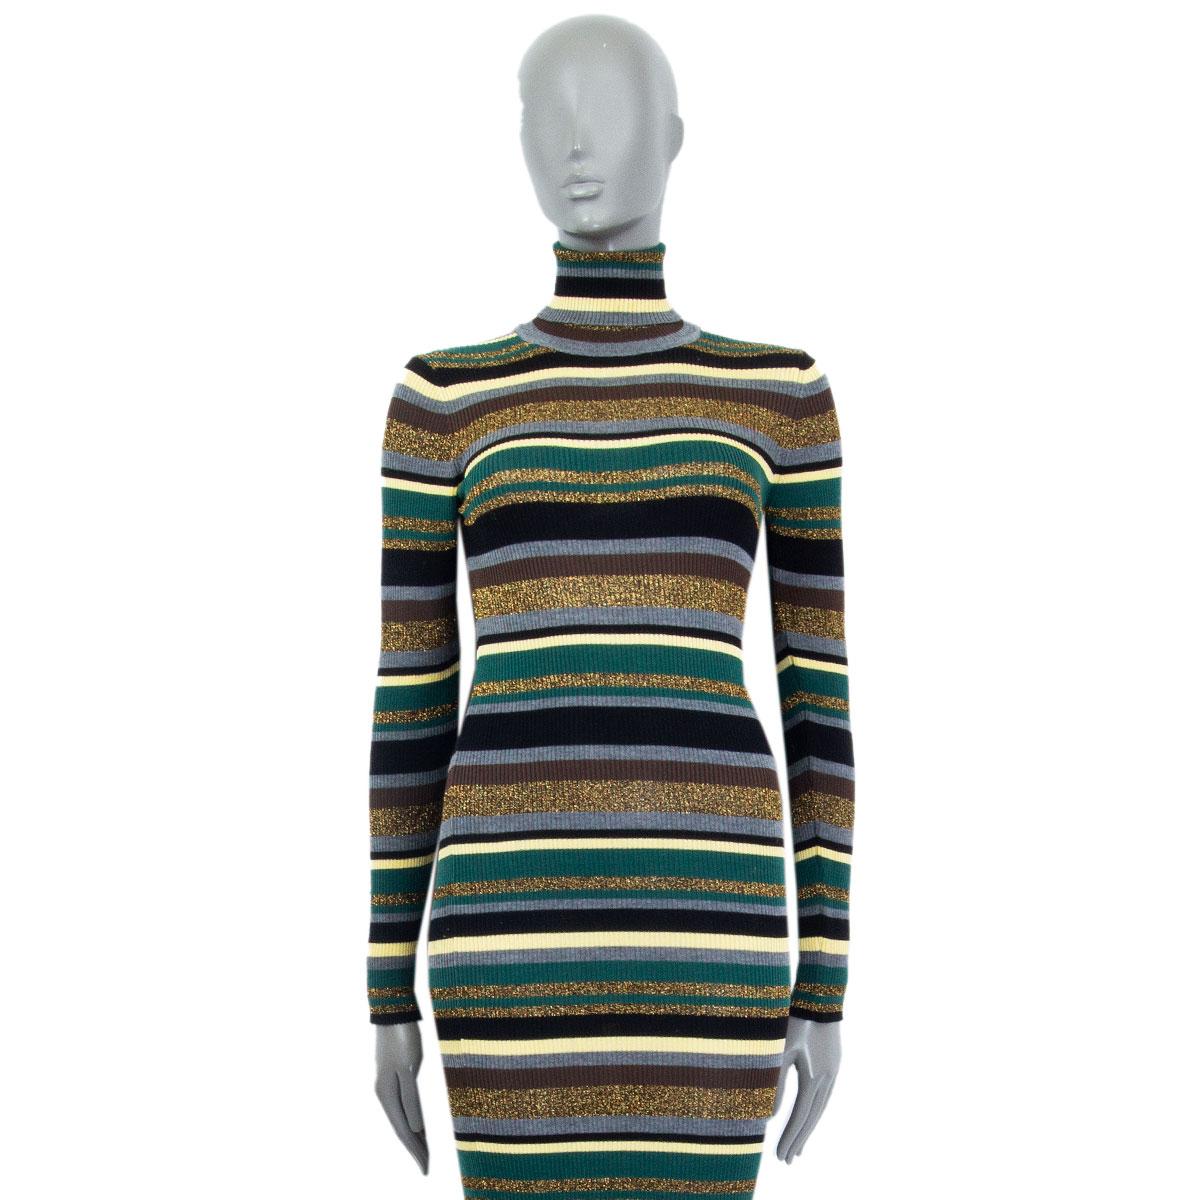 authentic Emilio Pucci knit striped dress in gray, black, brown, green, yellow vergin wool (53%), viscose (26%), cupro (13%) and golden lurex (8%) with long sleeves and a turtleneck. Unlined. Has been worn and is in excellent condition.

Tag Size